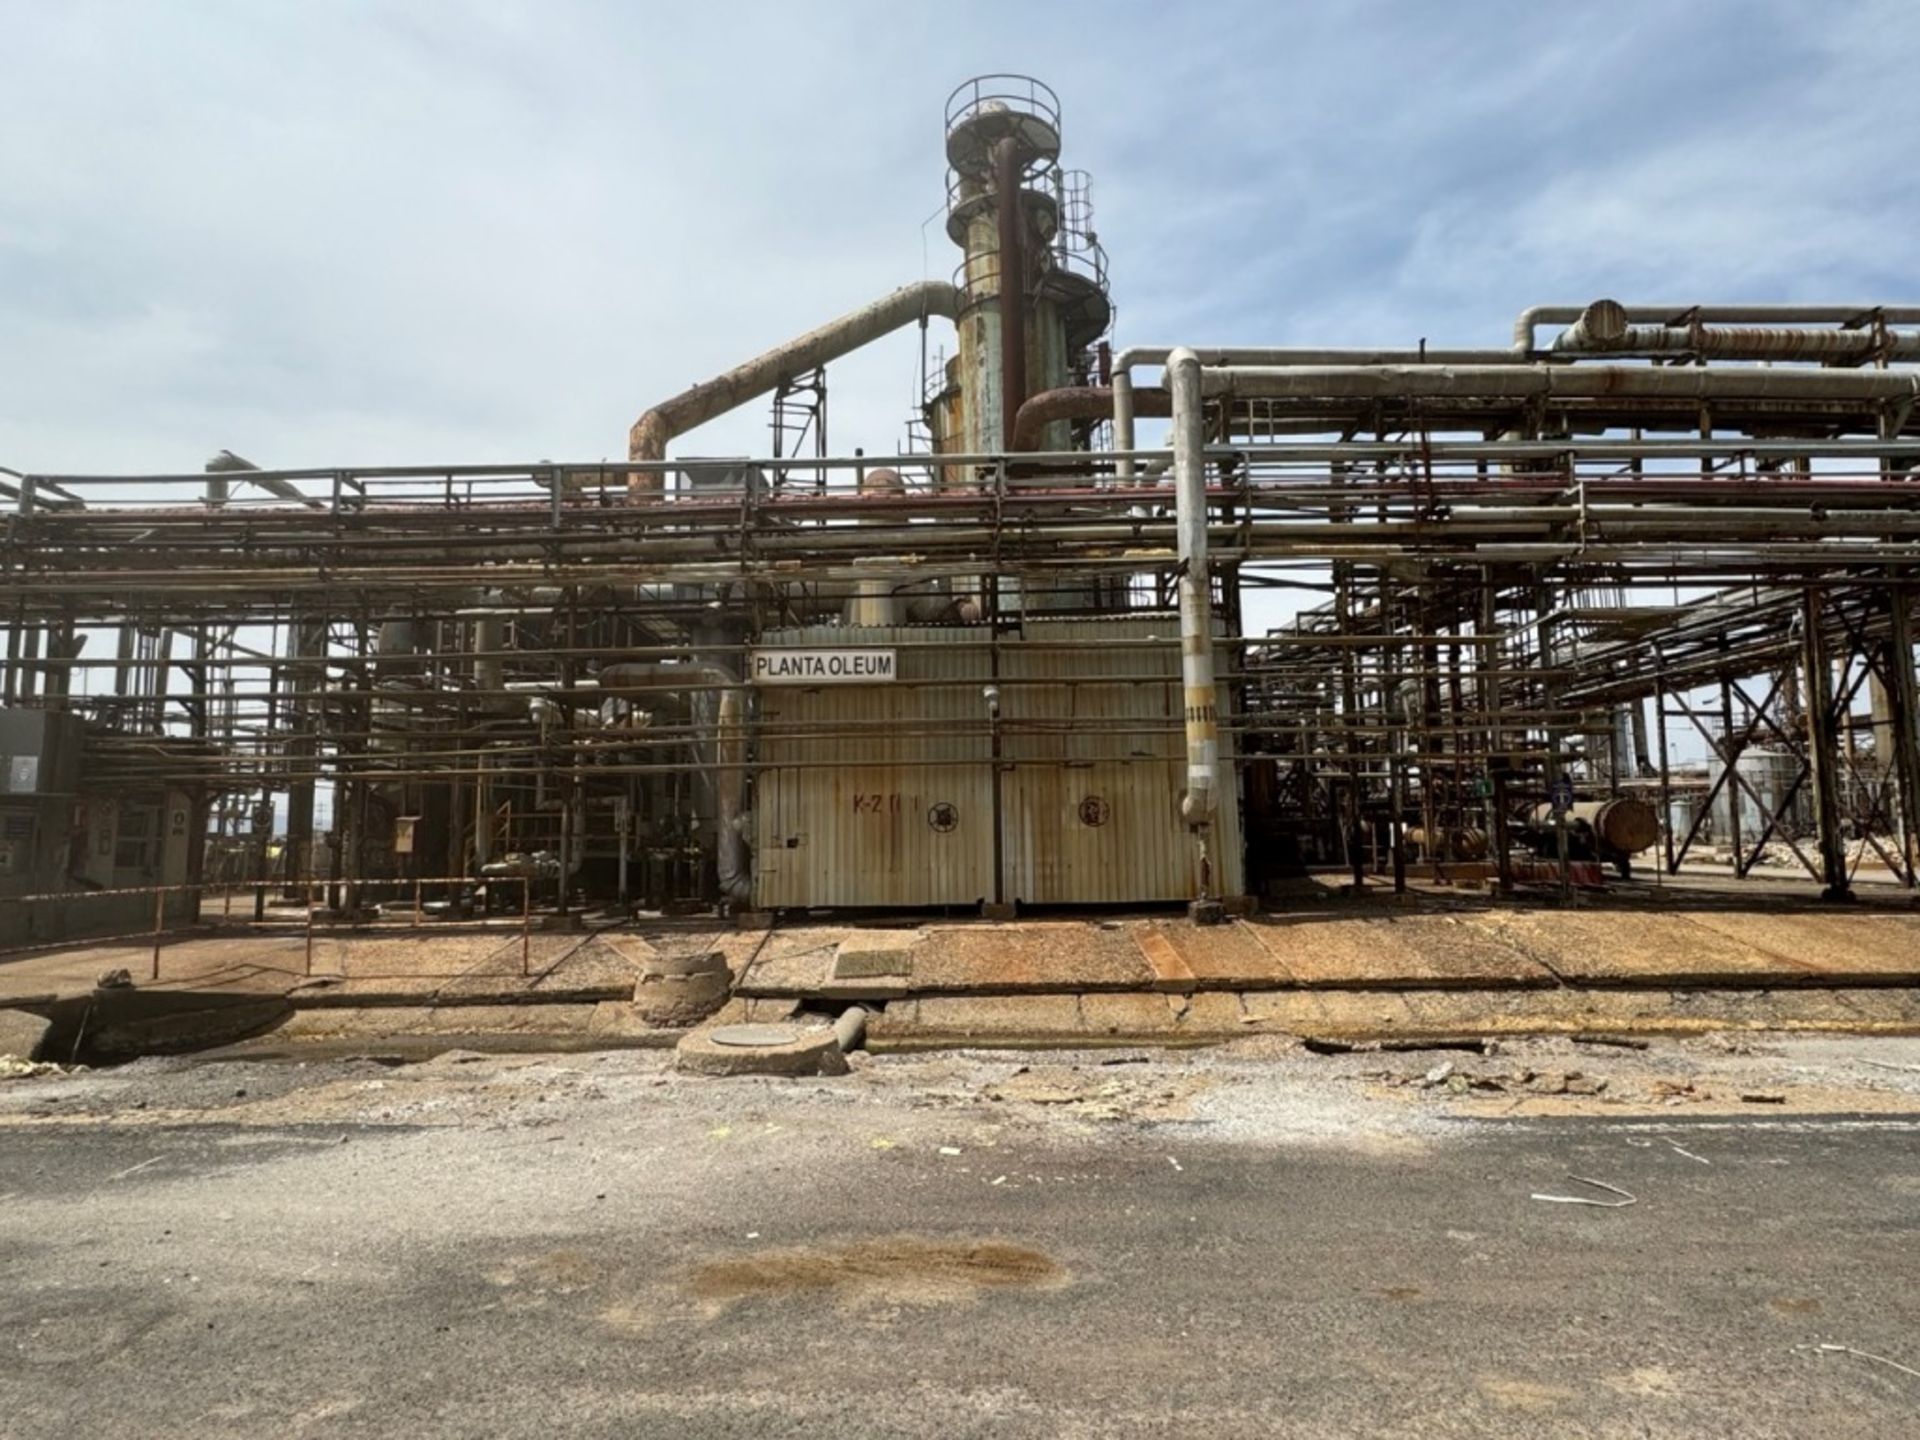 Complete industrial plant for chemical process of obtaining OLEUM, with a capacity to produce 117,2 - Image 95 of 104